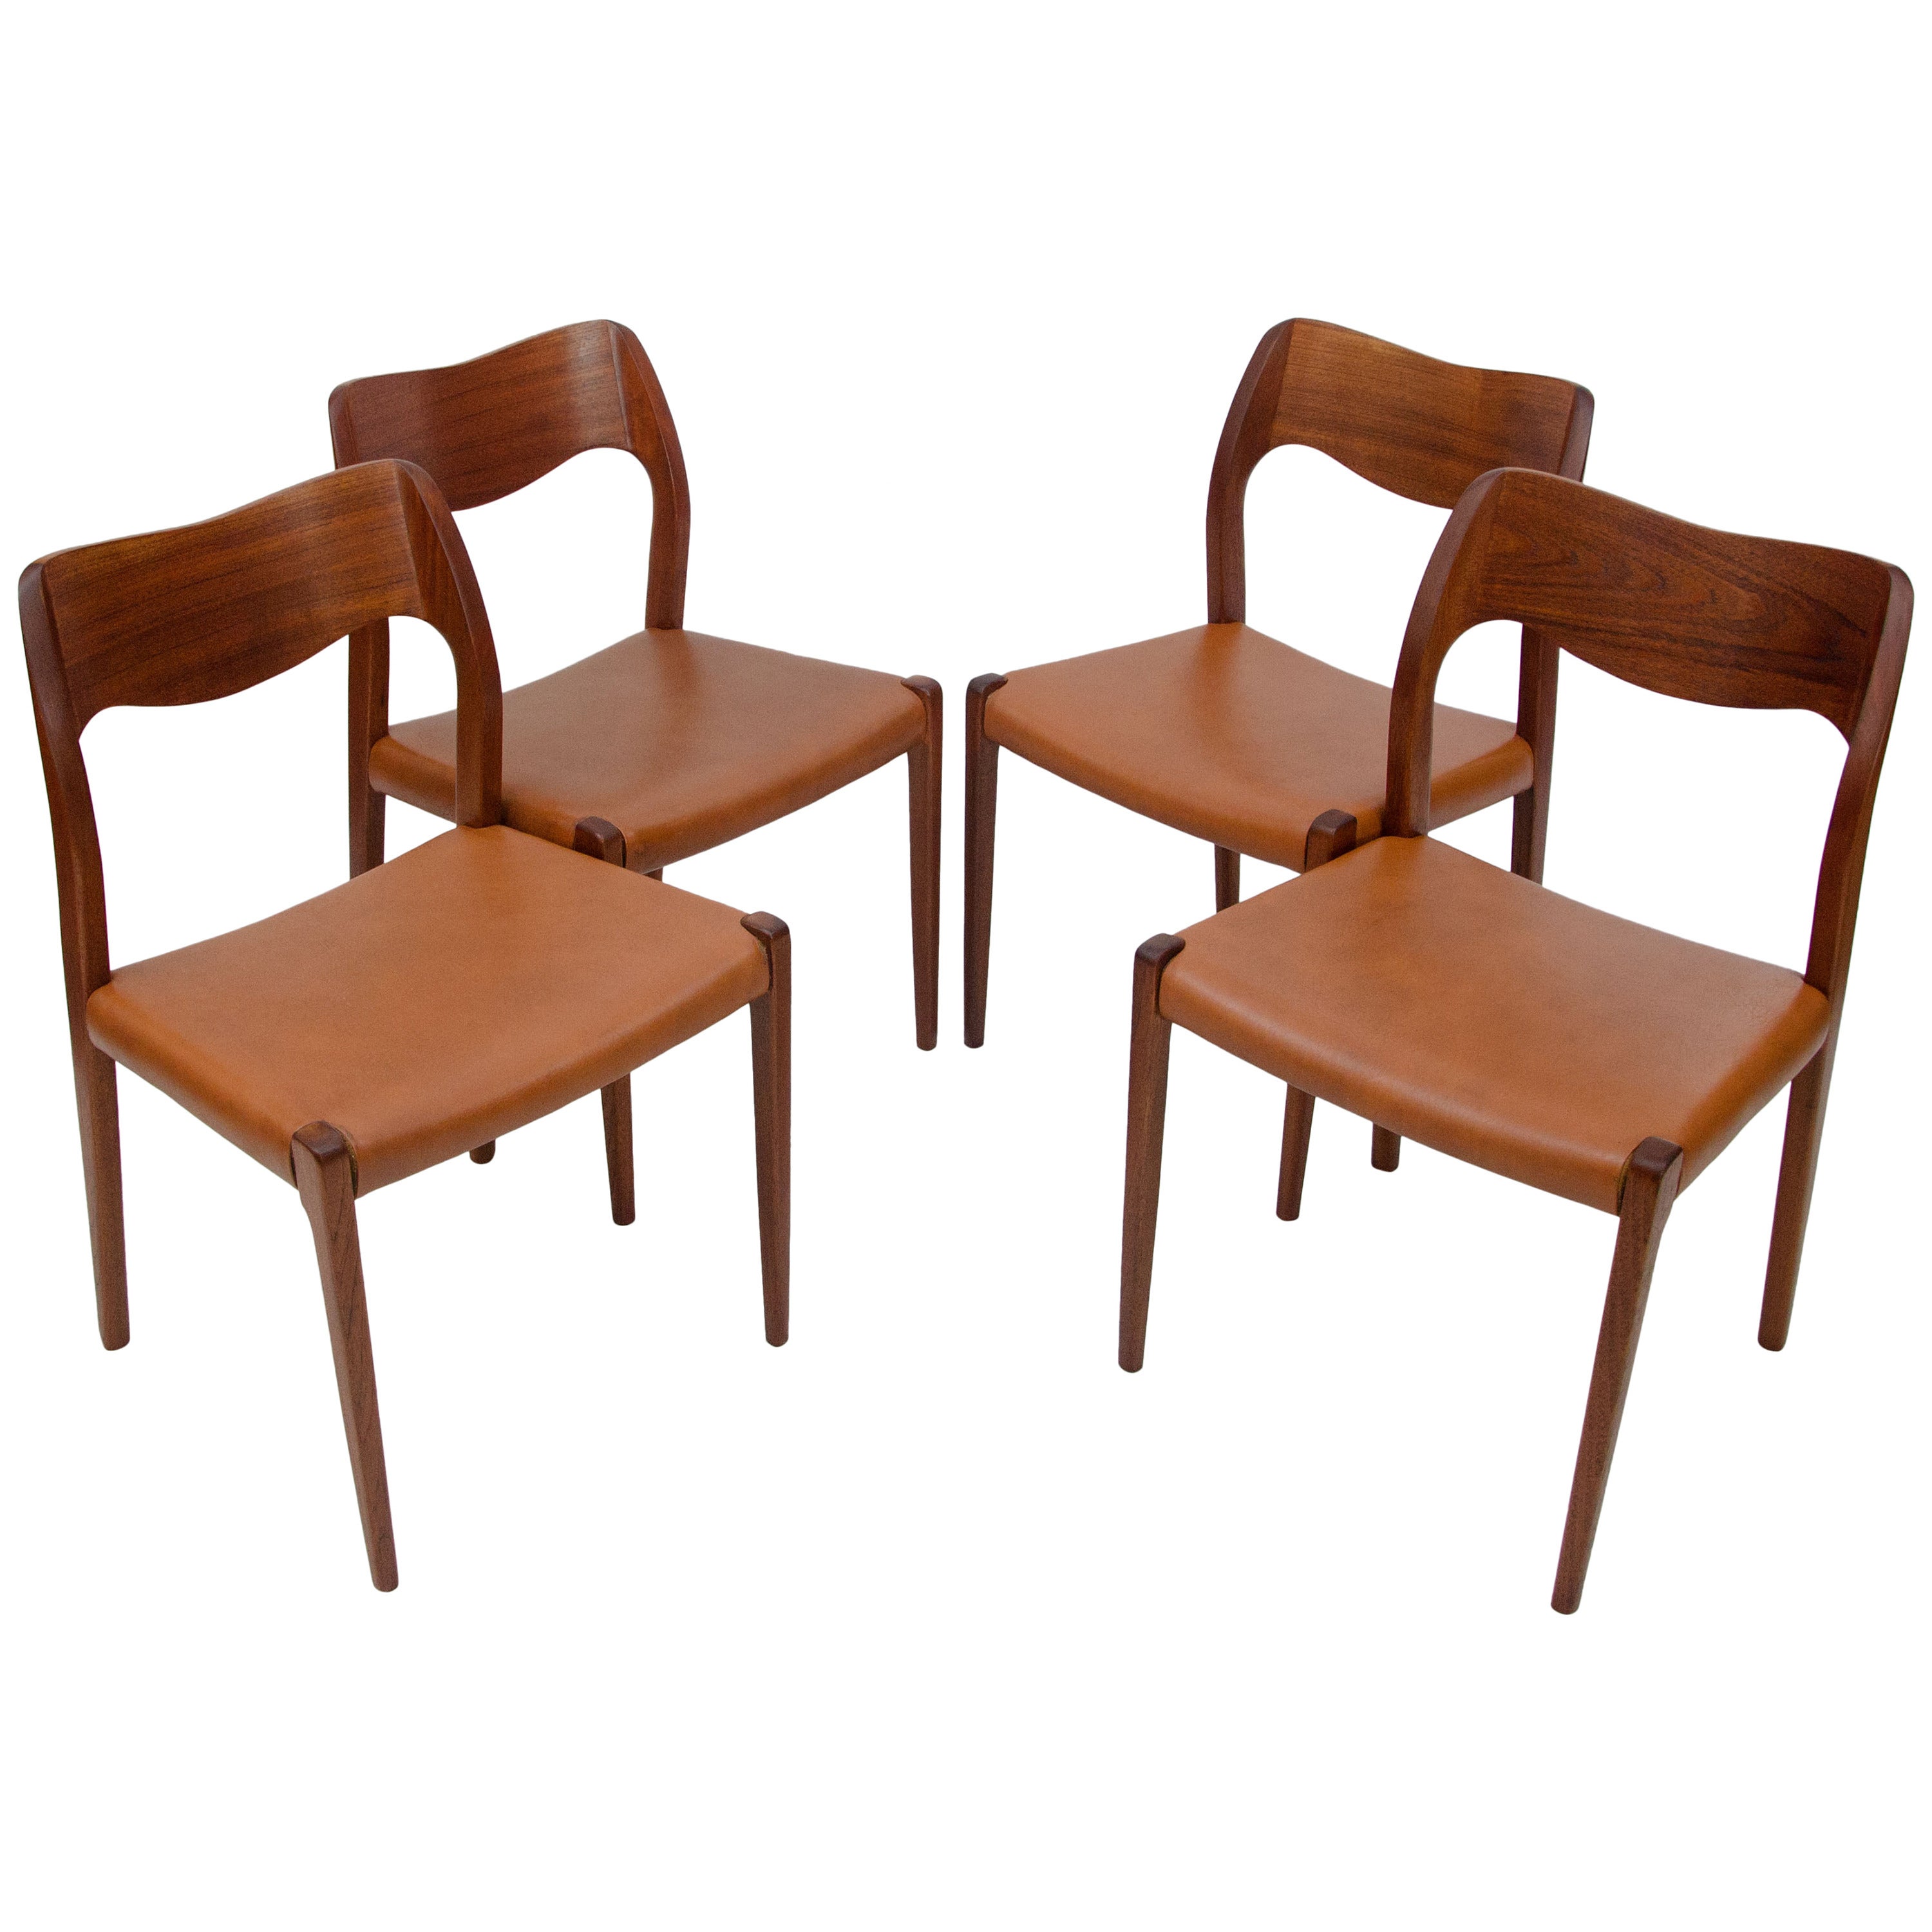 Set of Four Danish Teak Dining Chairs, Moller Model No. 71 For Sale